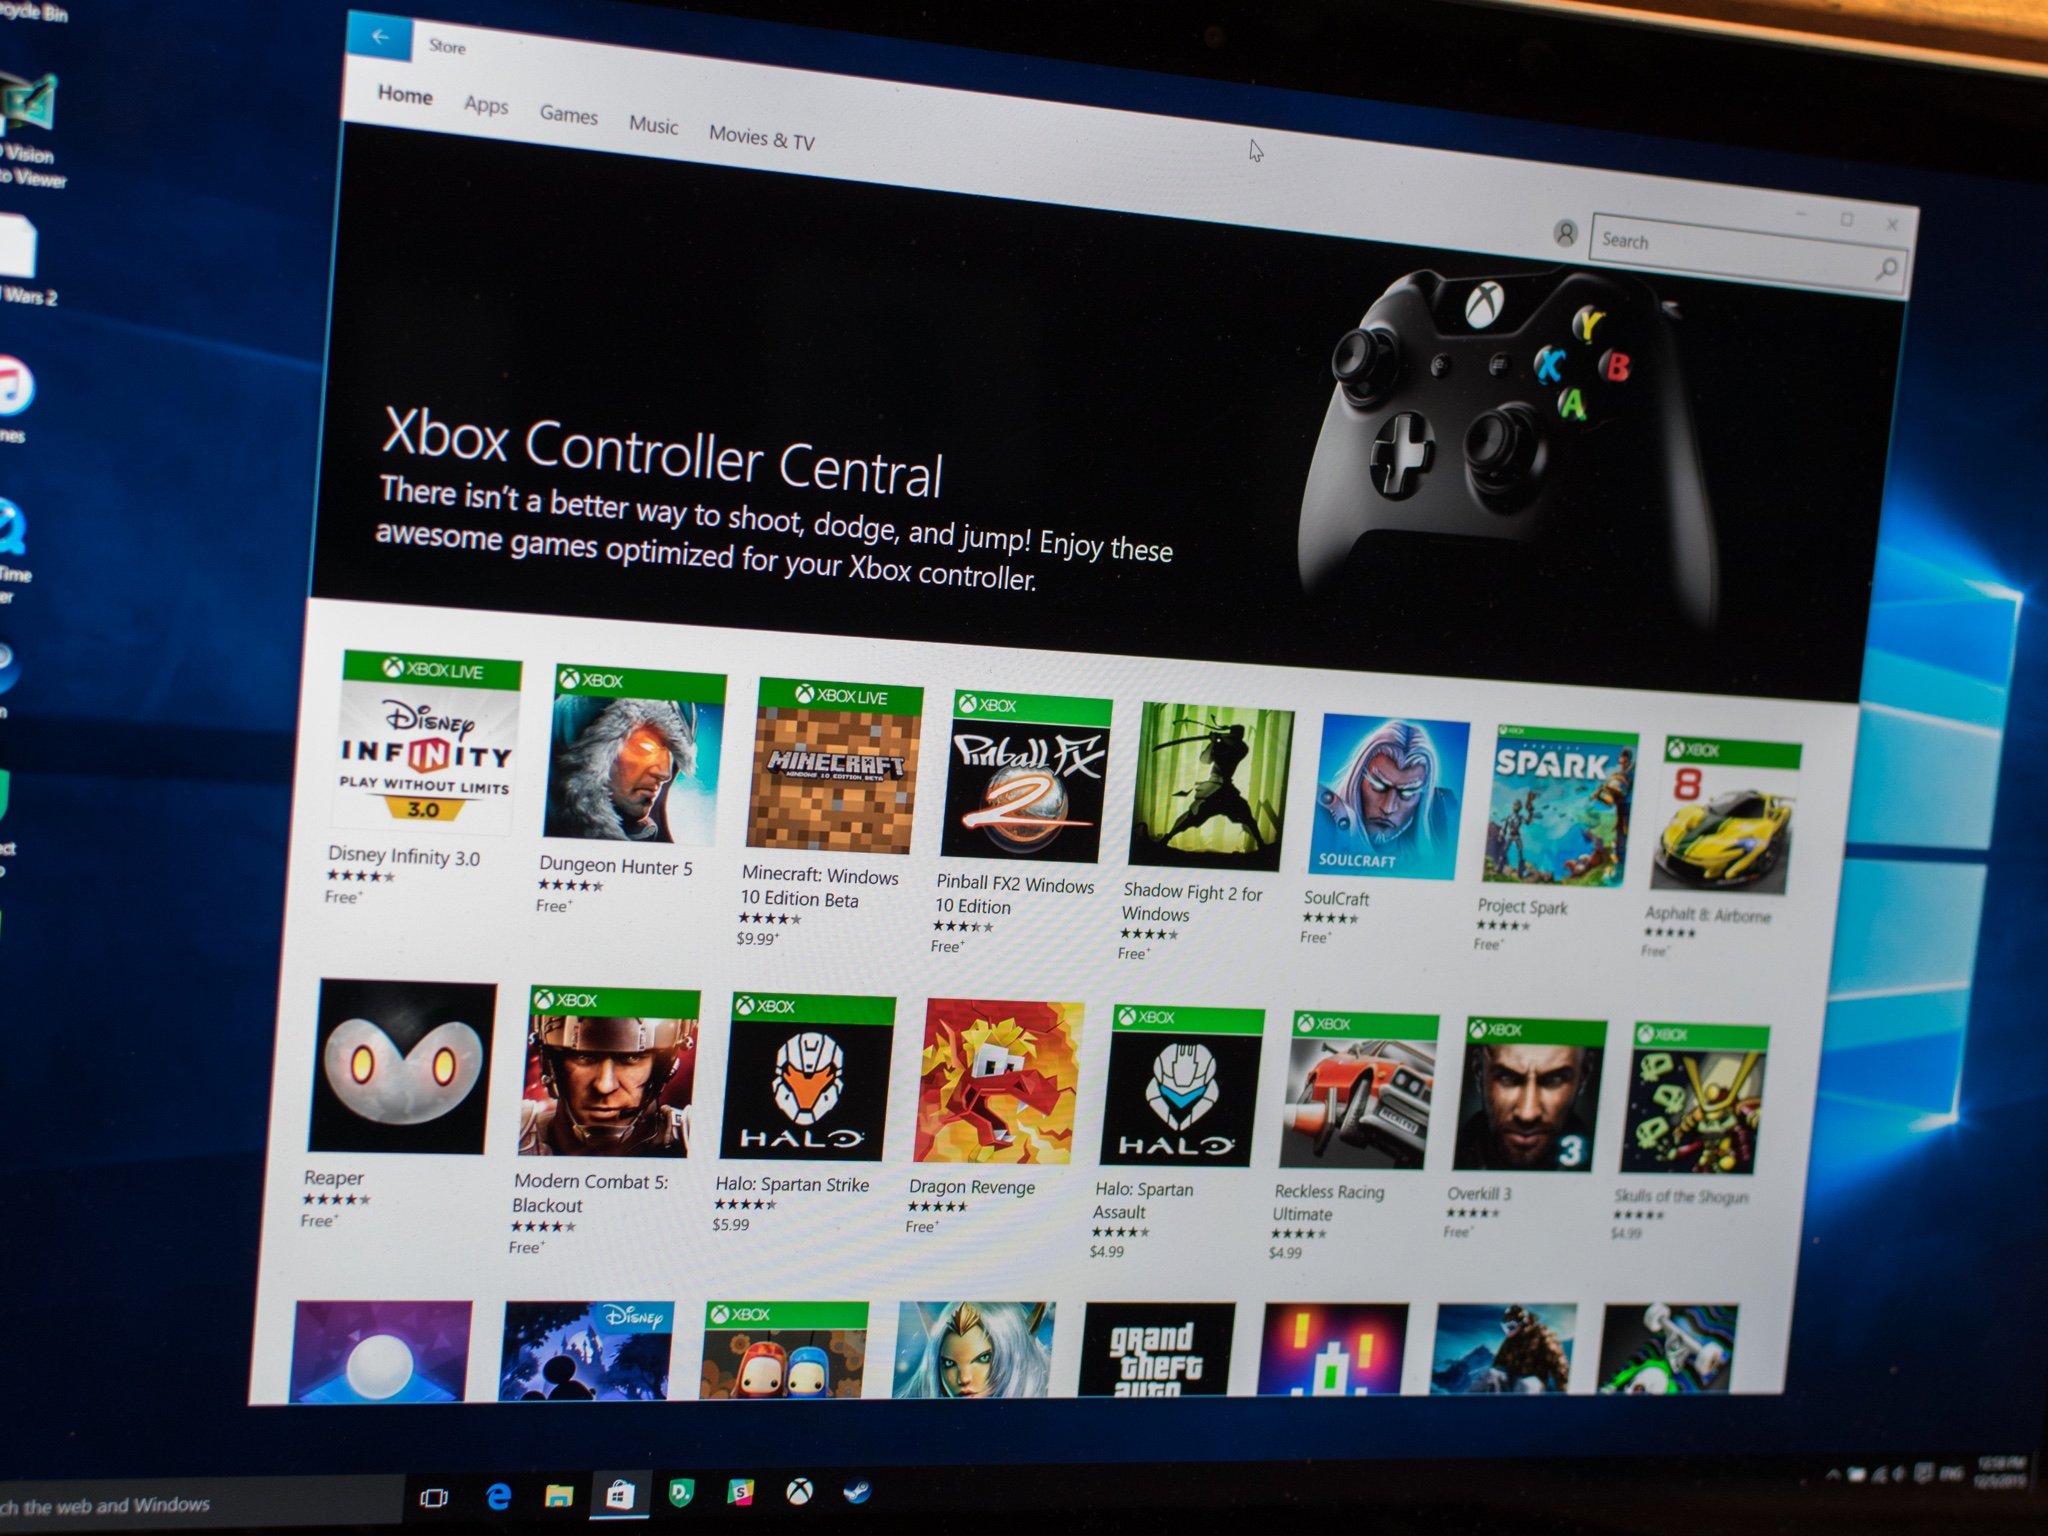 Windows Store highlights the best PC games to play with a